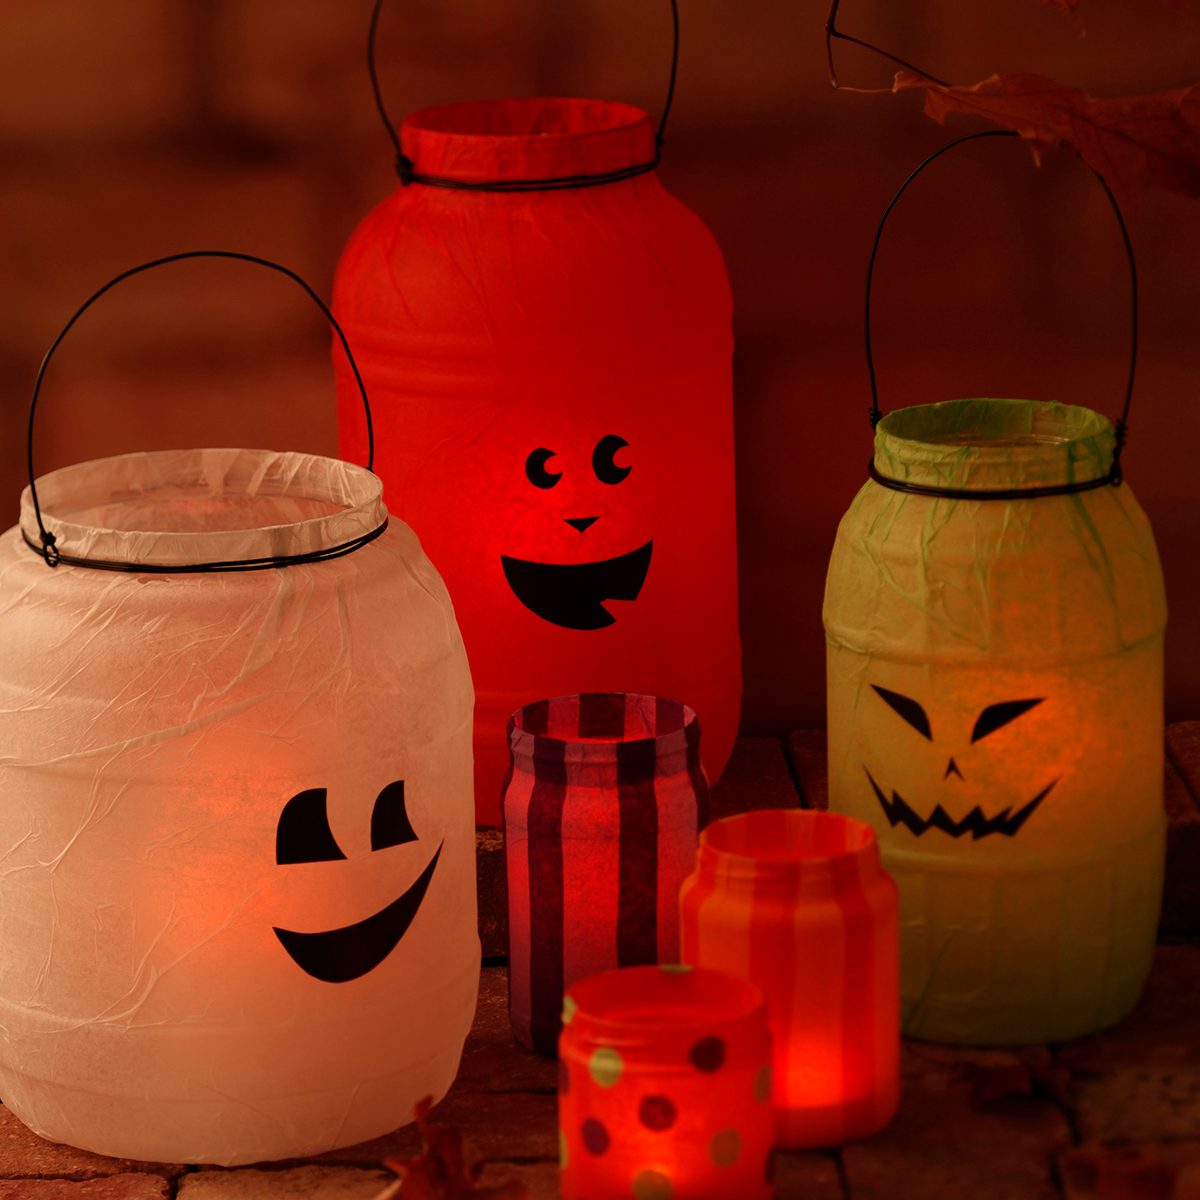 Mason jars covered in halloween-themed tissue paper like ghosts, jack-o-lantern and monsters lit up by candles